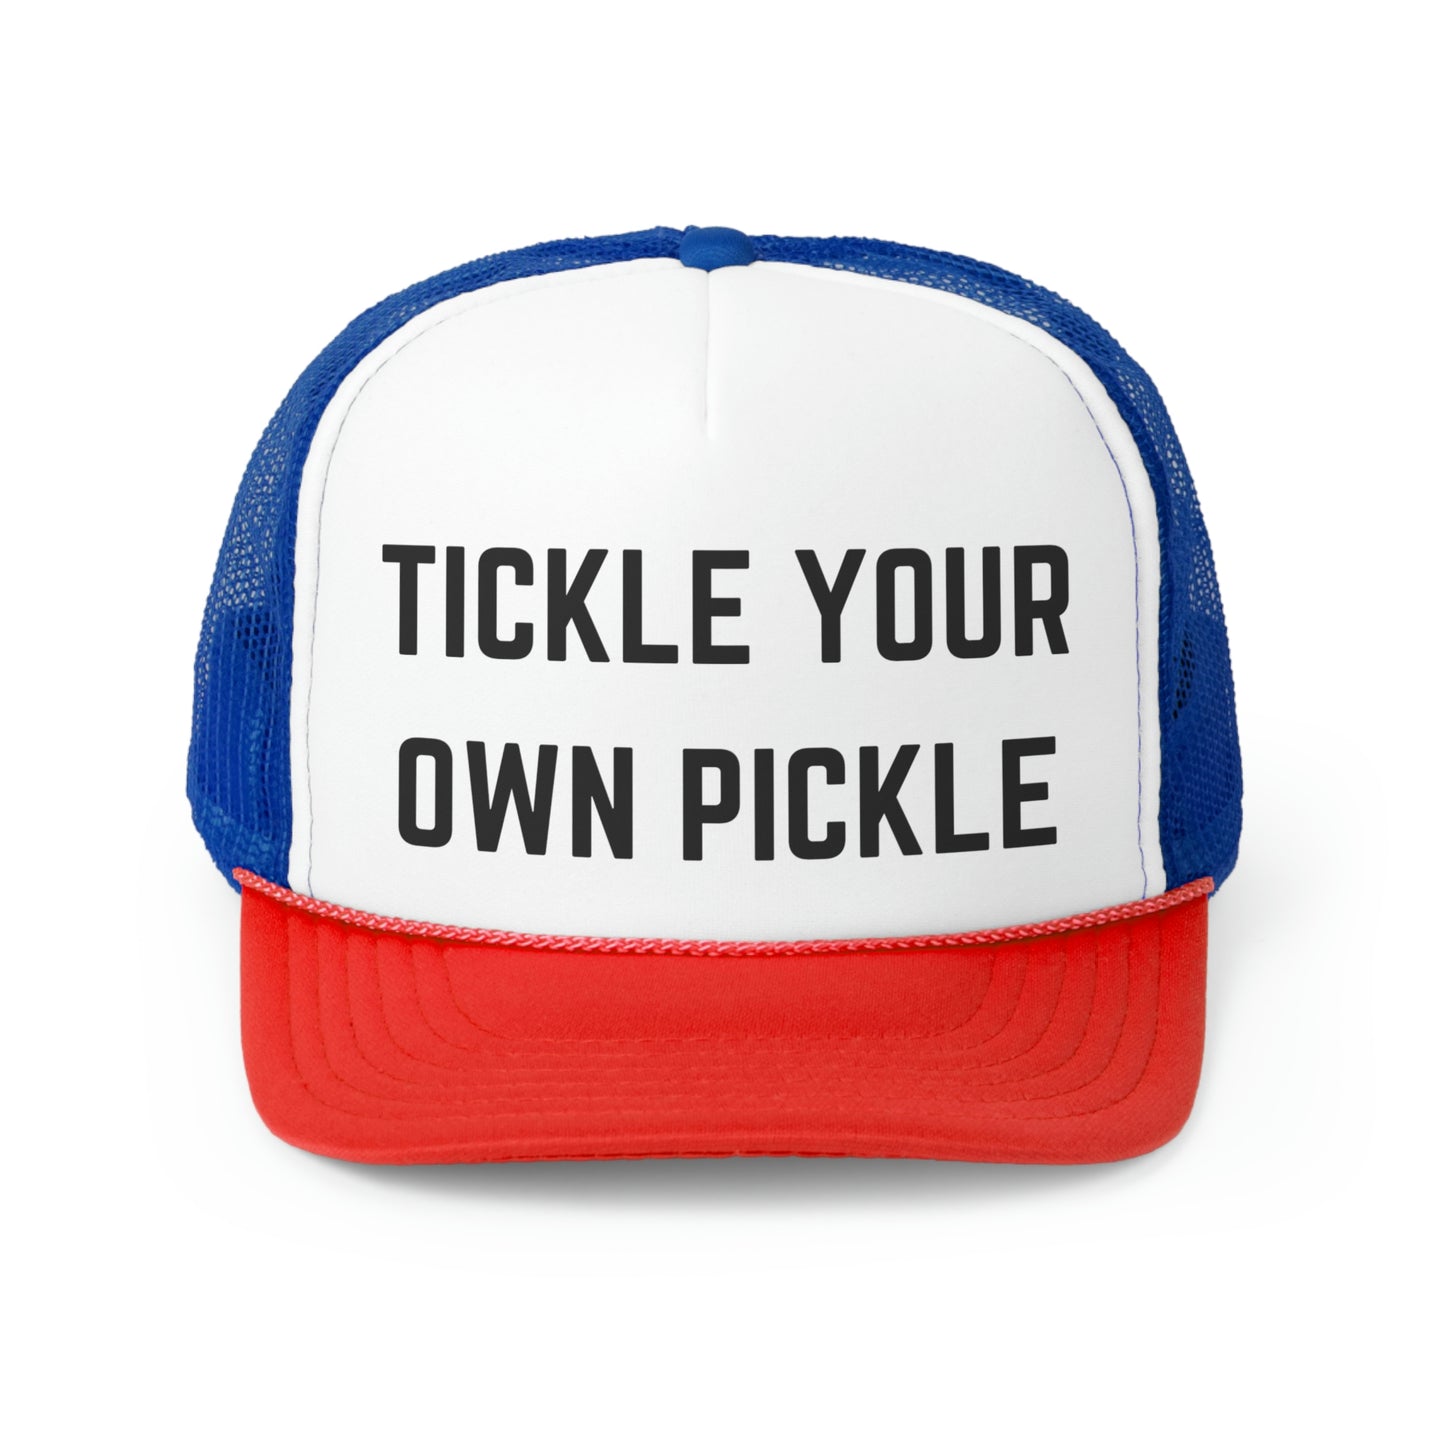 Tickle Your Own Pickle